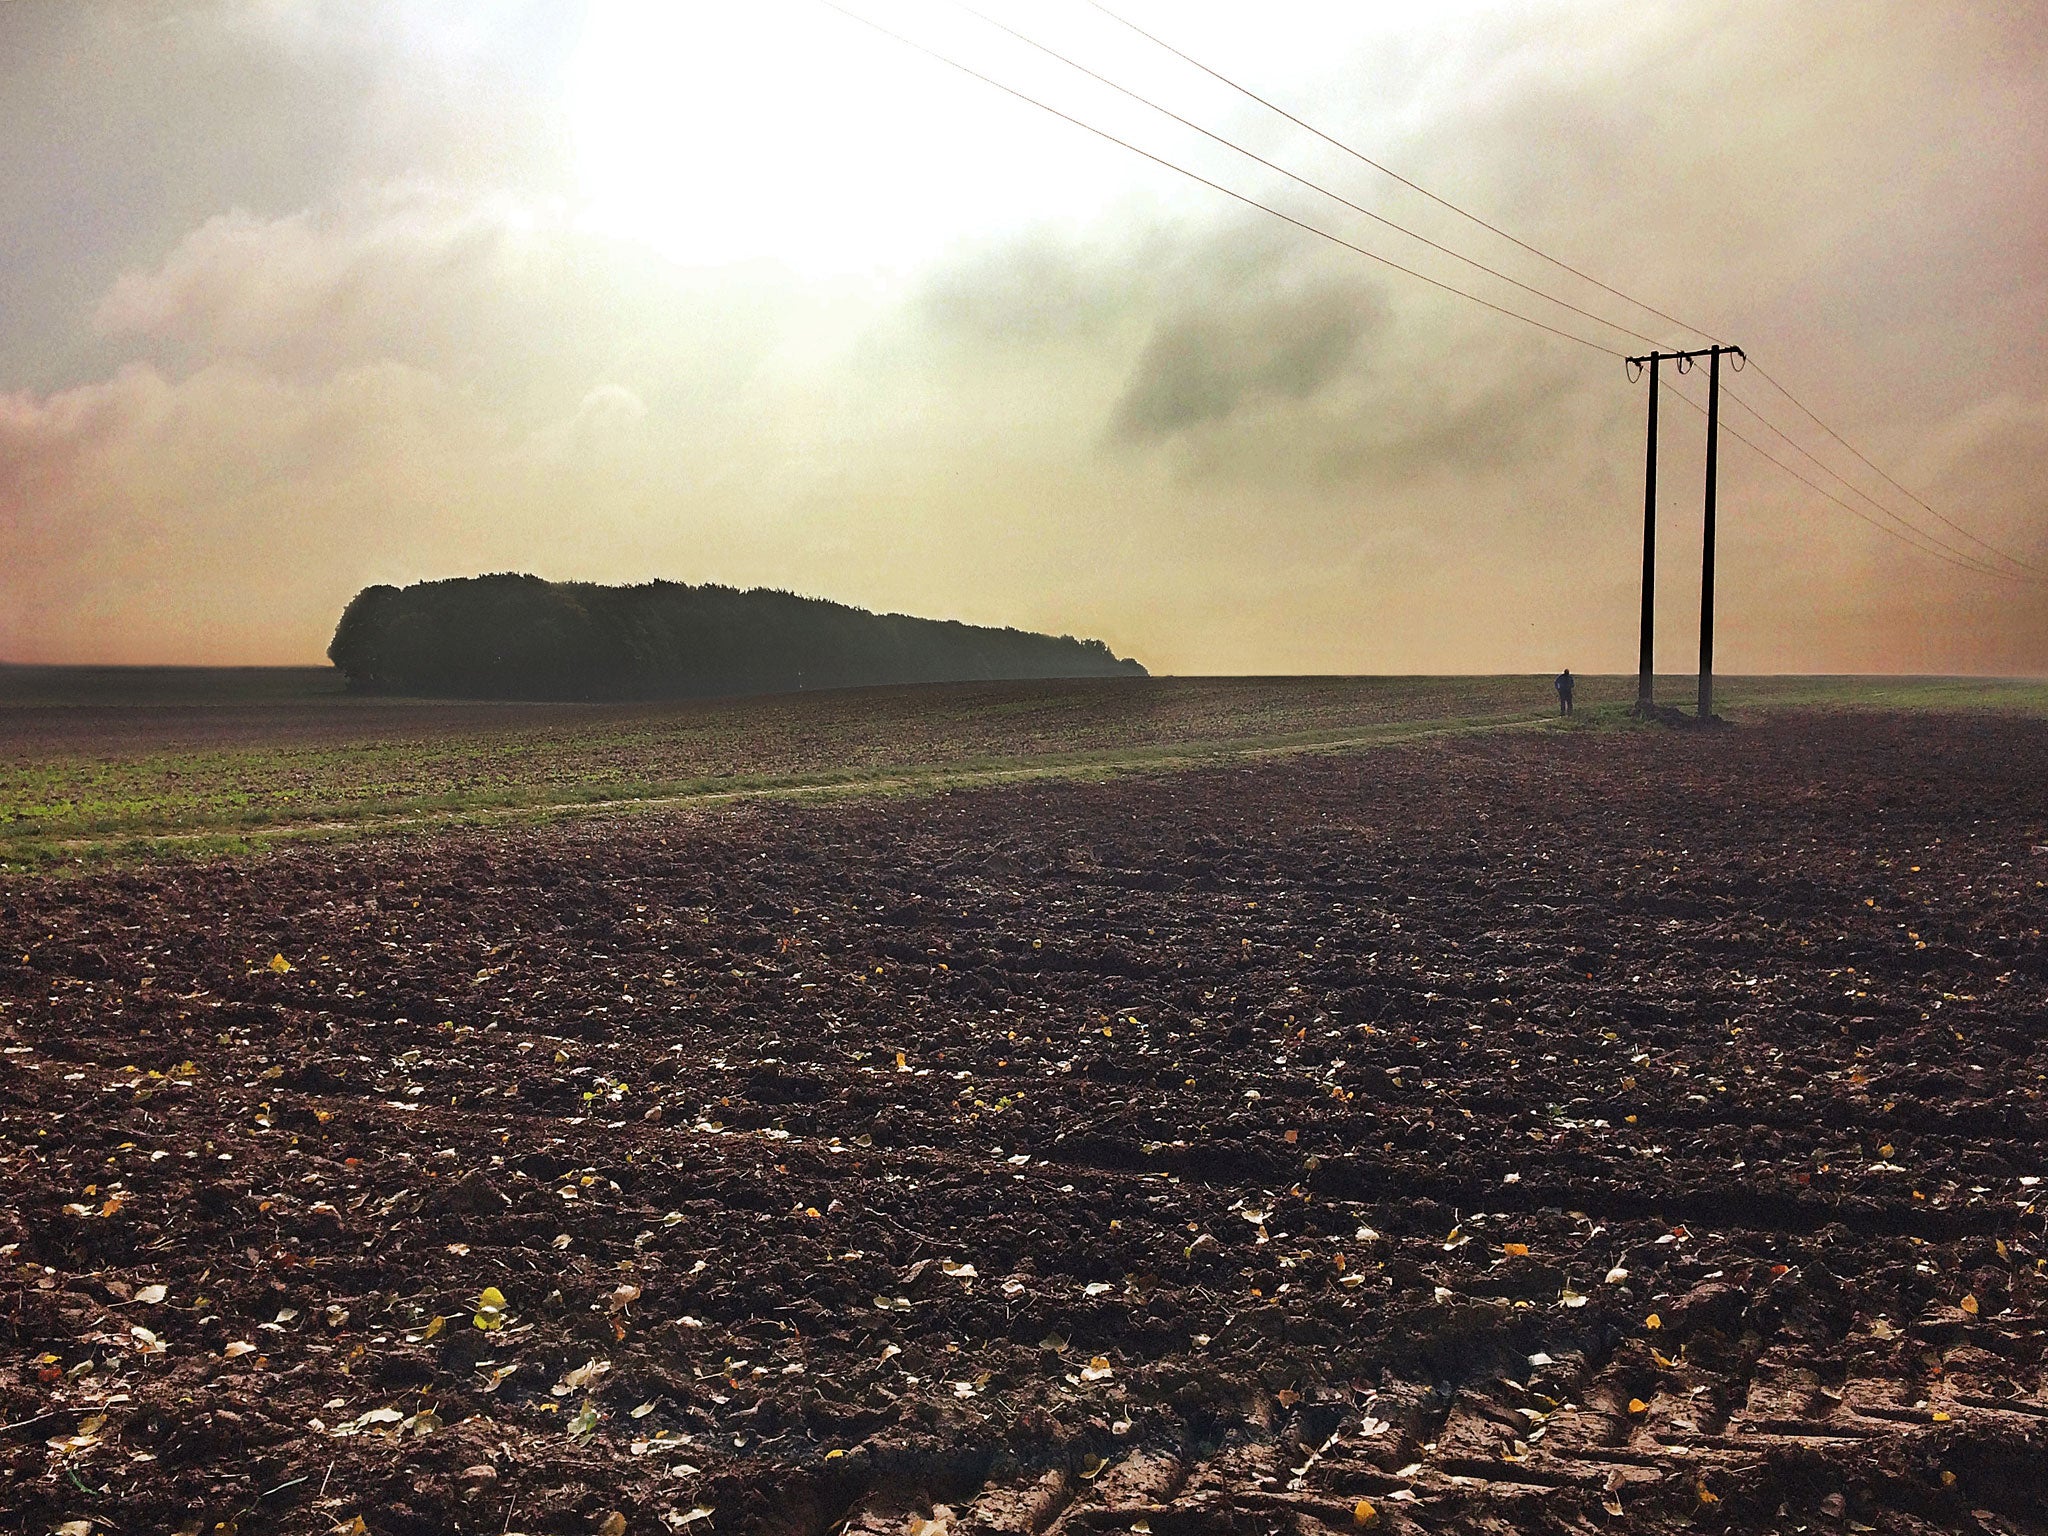 ‘The tiny figure in the landscape is me, at the spot where my father was wounded in October 1916’